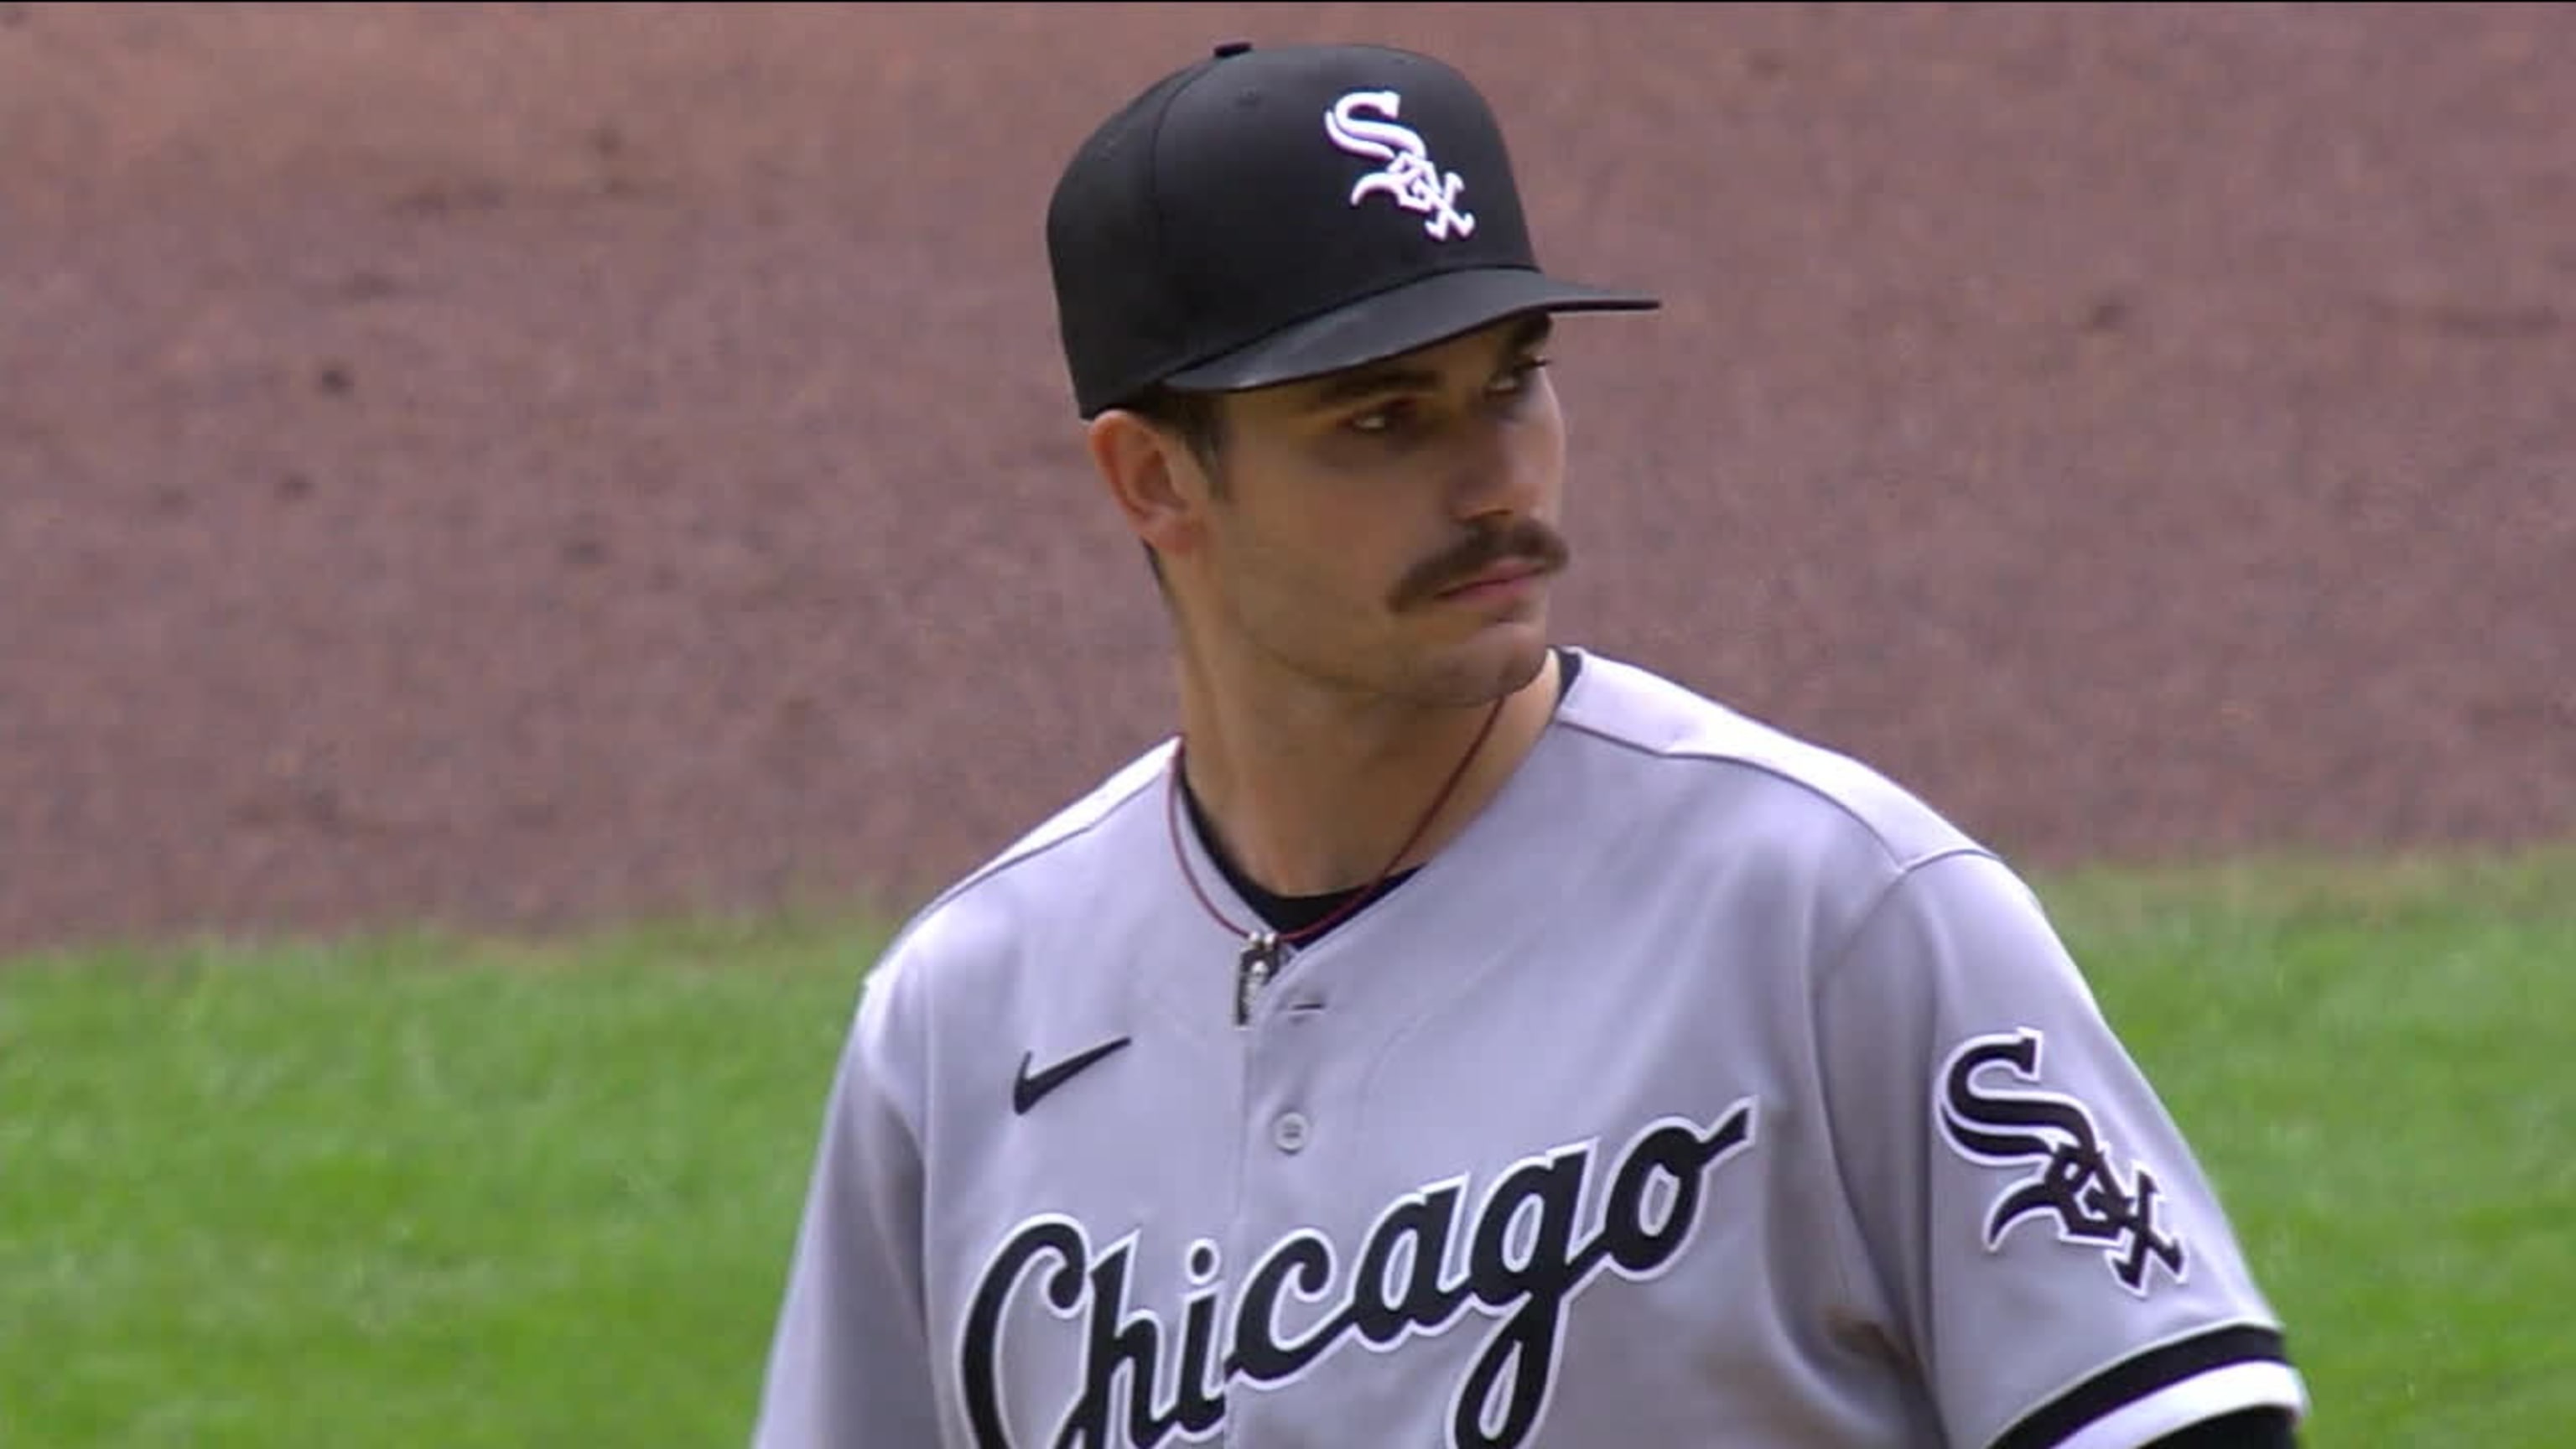 Real deal: How White Sox starter Dylan Cease has become one of